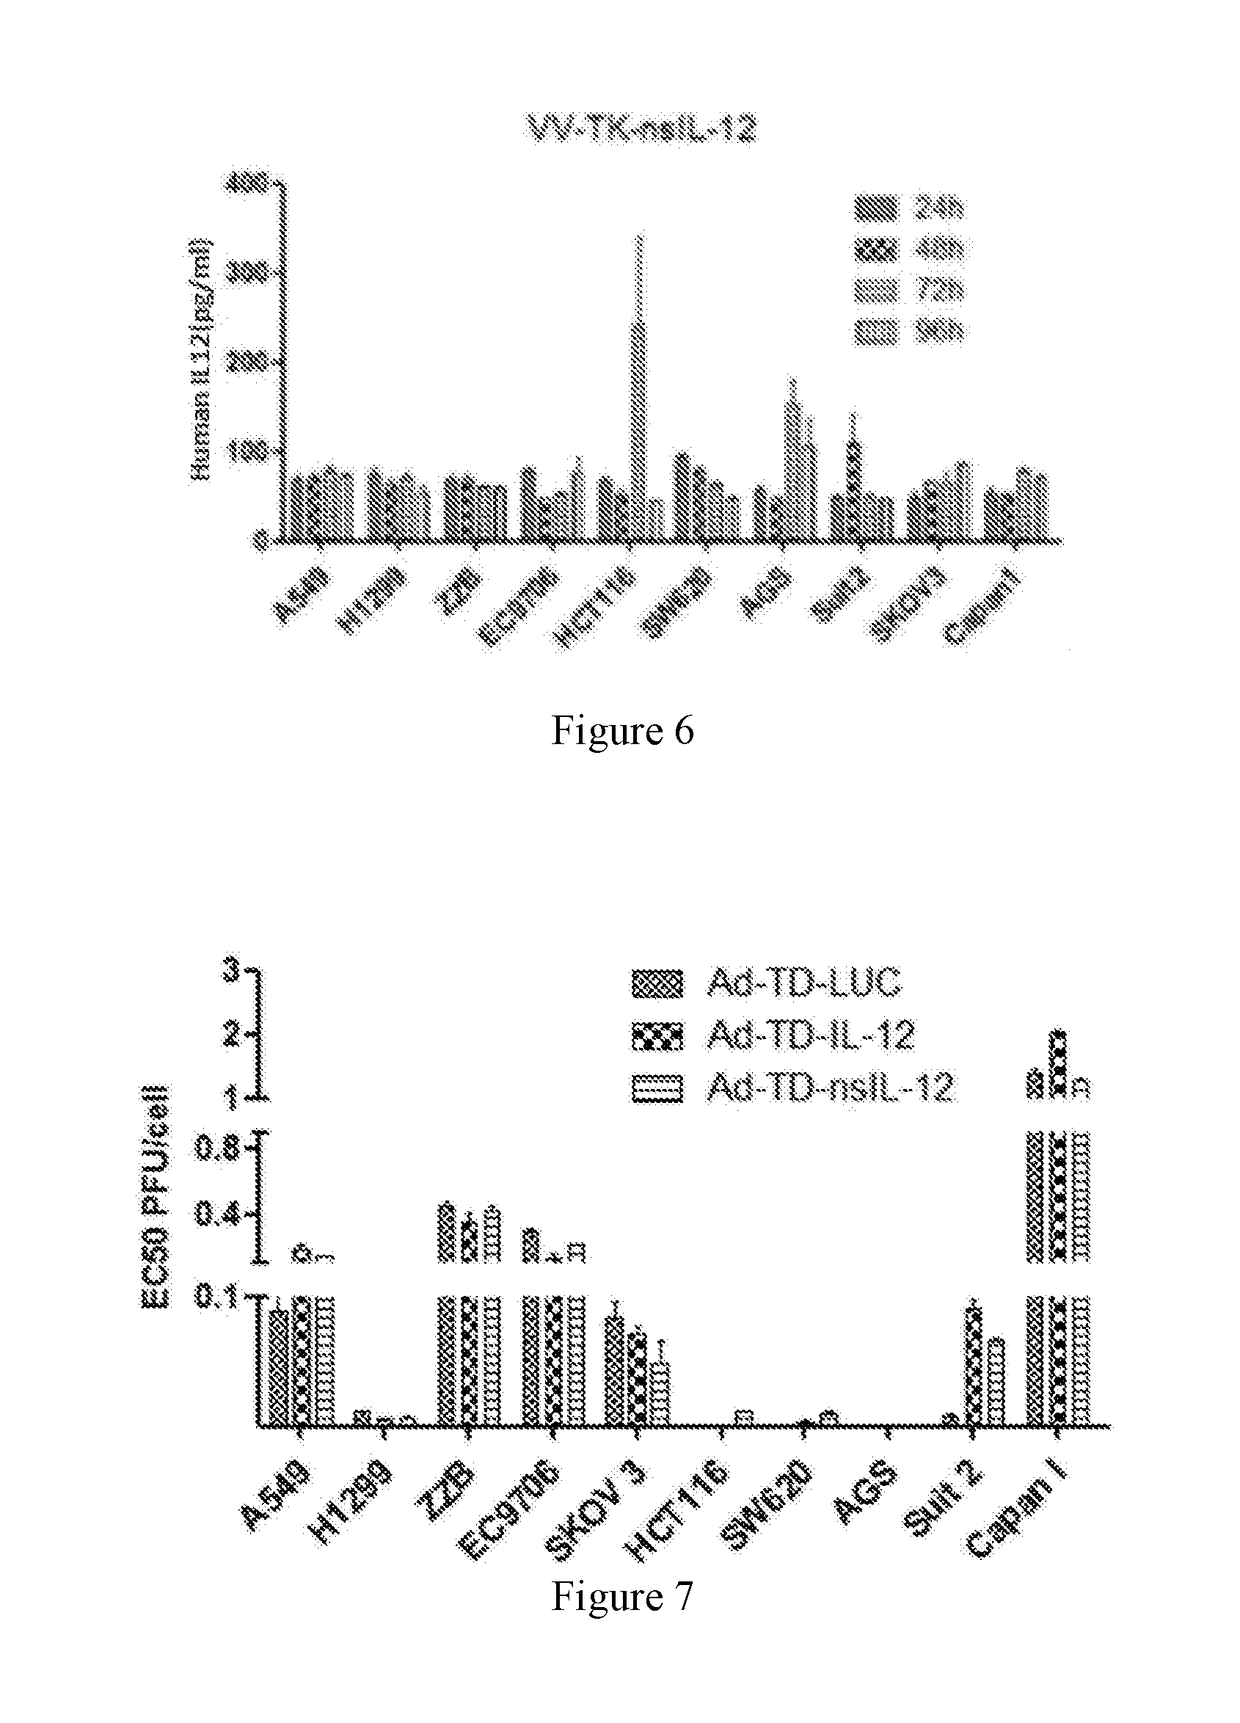 Modified interleukin 12 and use thereof in preparing drugs for treating tumours